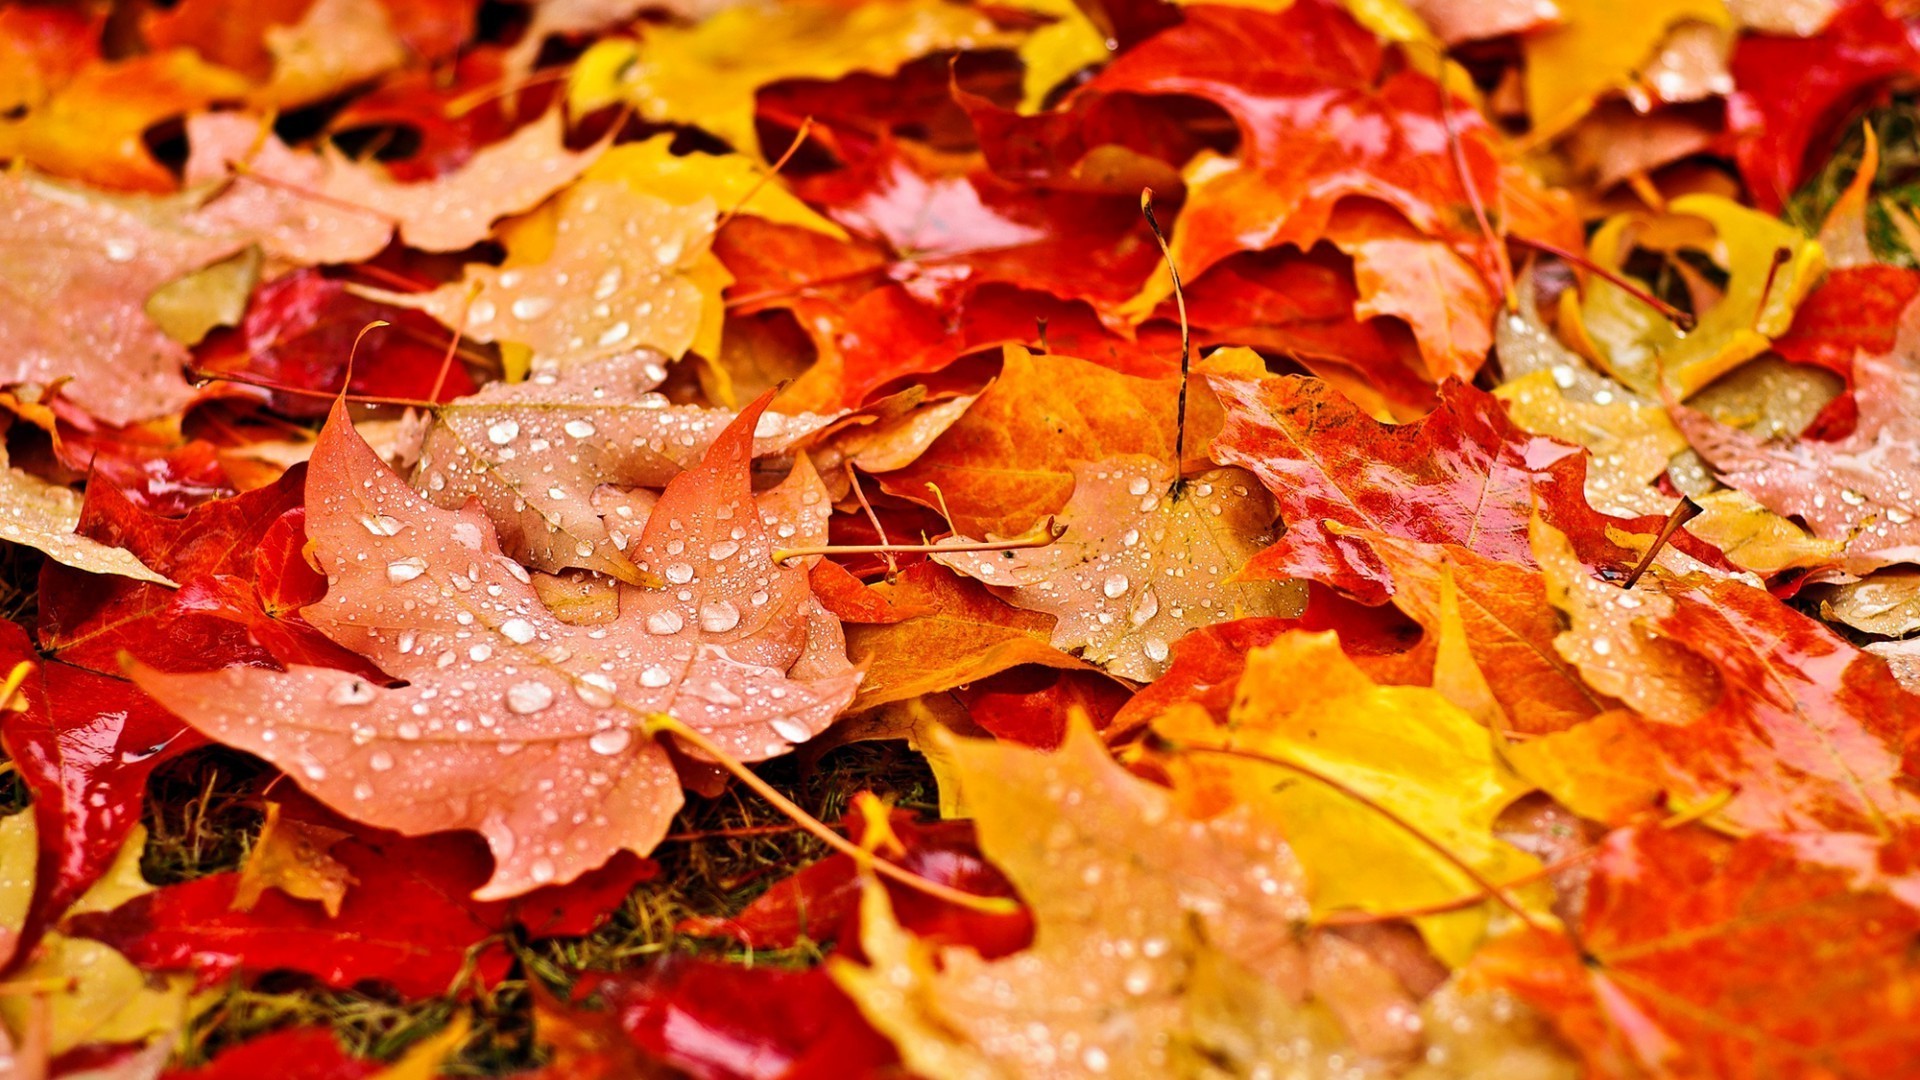 1920x1080 Fall desktop backgrounds Â· Fall Leaves Wallpapers Hd Resolution